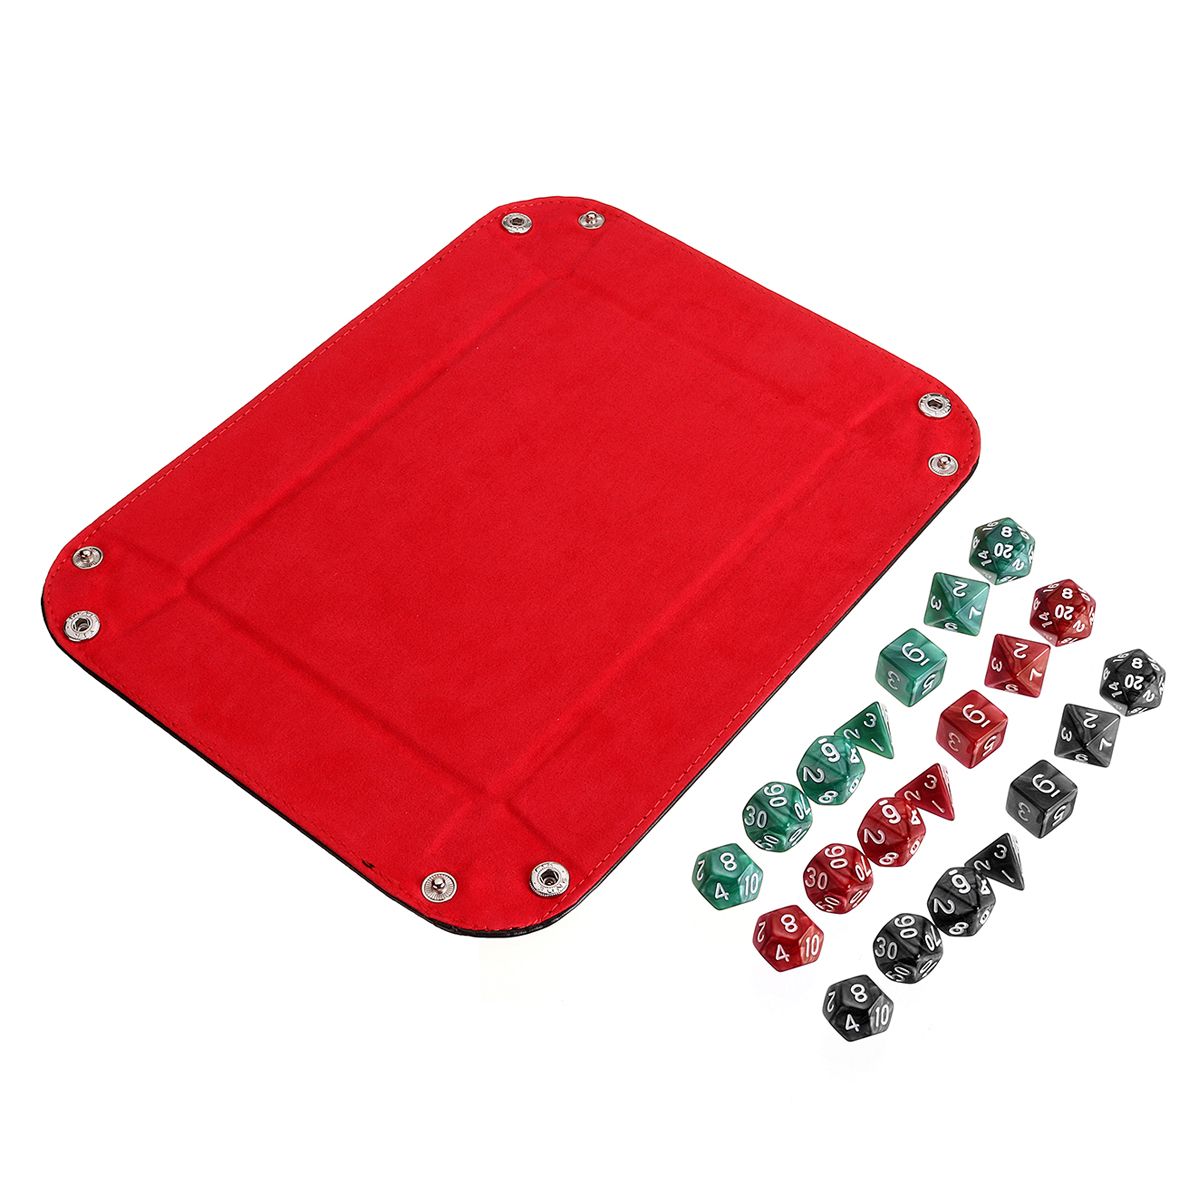 Multisided-Dice-Holder-Polyhedral-Dices-PU-Leather-Folding-Rectangle-Tray-for-RPG-1372549